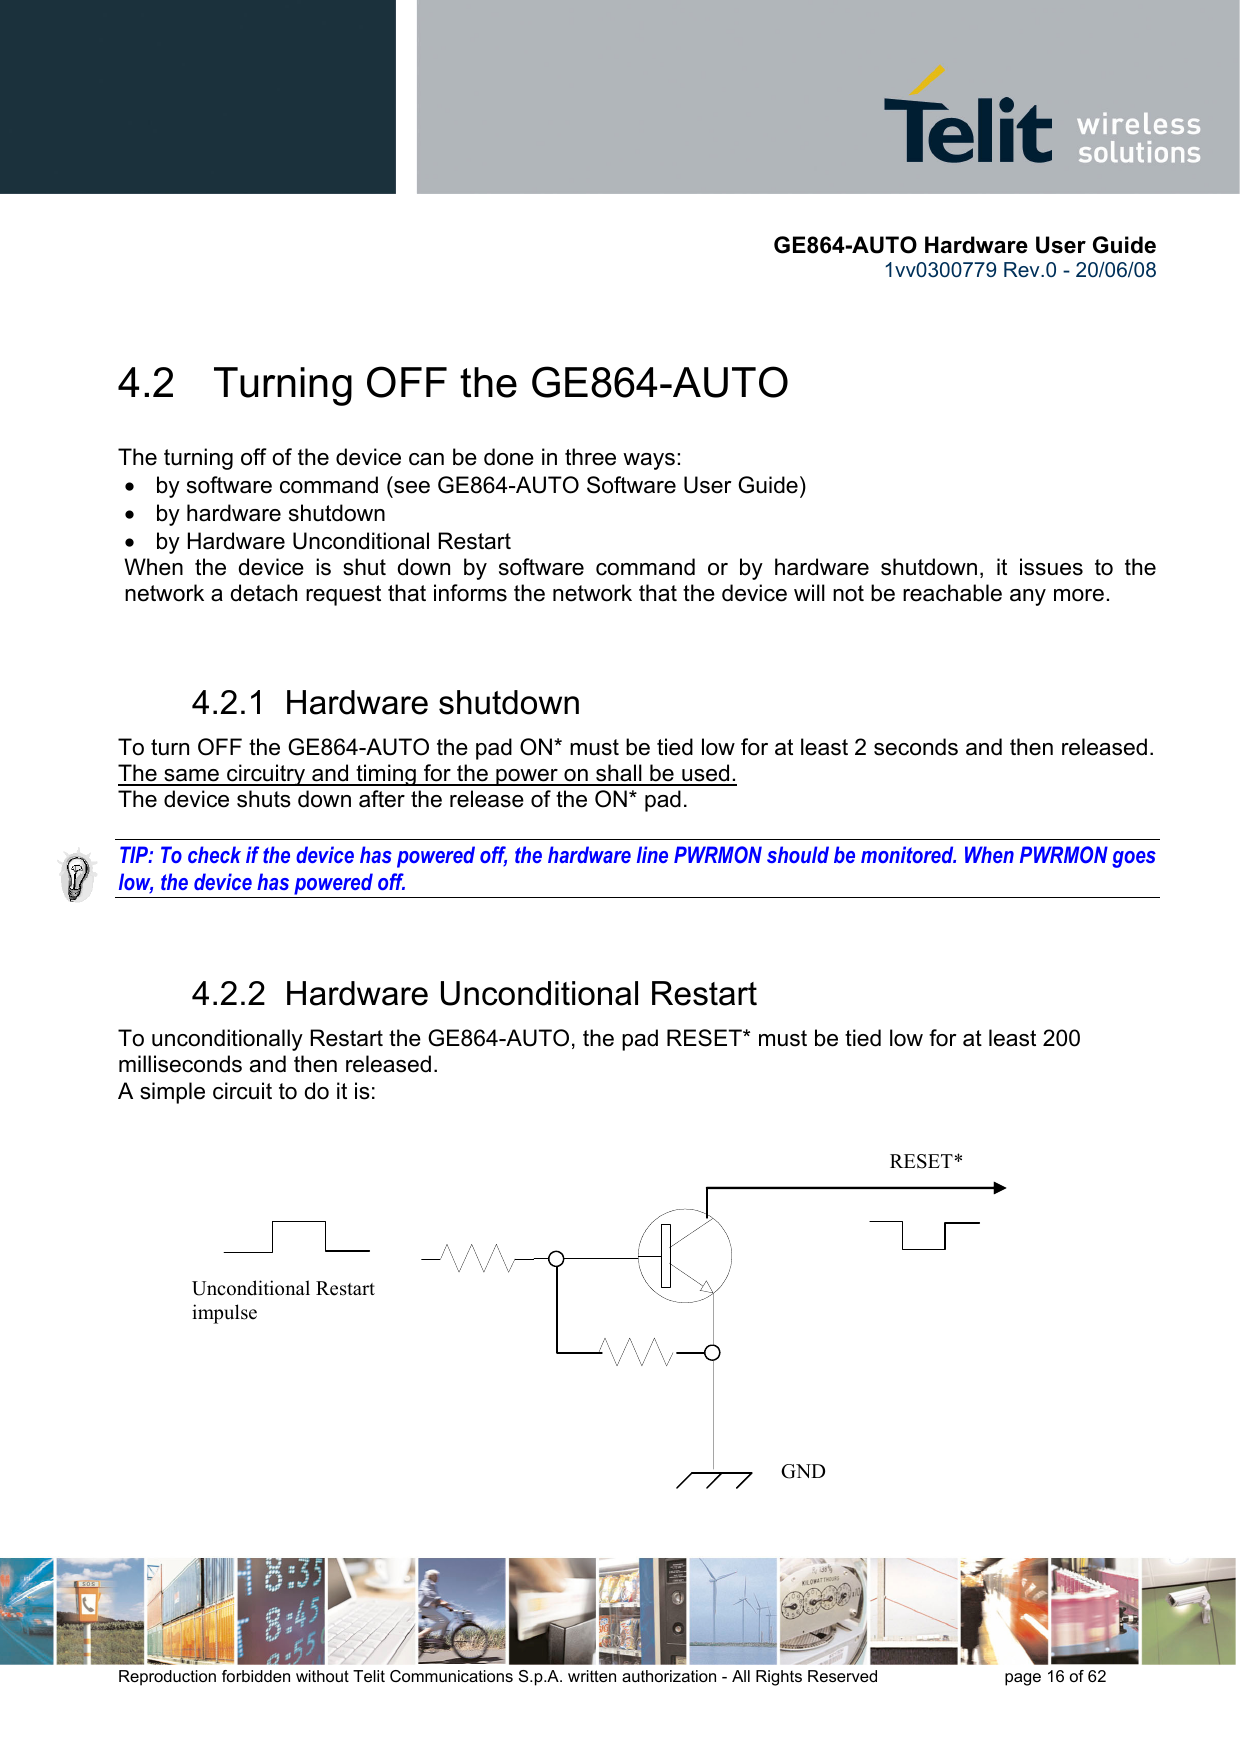       GE864-AUTO Hardware User Guide 1vv0300779 Rev.0 - 20/06/08      Reproduction forbidden without Telit Communications S.p.A. written authorization - All Rights Reserved    page 16 of 62   4.2   Turning OFF the GE864-AUTO The turning off of the device can be done in three ways: •  by software command (see GE864-AUTO Software User Guide) •  by hardware shutdown •  by Hardware Unconditional Restart When the device is shut down by software command or by hardware shutdown, it issues to the network a detach request that informs the network that the device will not be reachable any more.   4.2.1  Hardware shutdown To turn OFF the GE864-AUTO the pad ON* must be tied low for at least 2 seconds and then released. The same circuitry and timing for the power on shall be used. The device shuts down after the release of the ON* pad.  TIP: To check if the device has powered off, the hardware line PWRMON should be monitored. When PWRMON goes low, the device has powered off.  4.2.2  Hardware Unconditional Restart To unconditionally Restart the GE864-AUTO, the pad RESET* must be tied low for at least 200 milliseconds and then released. A simple circuit to do it is:              RESET* Unconditional Restart impulse   GND 